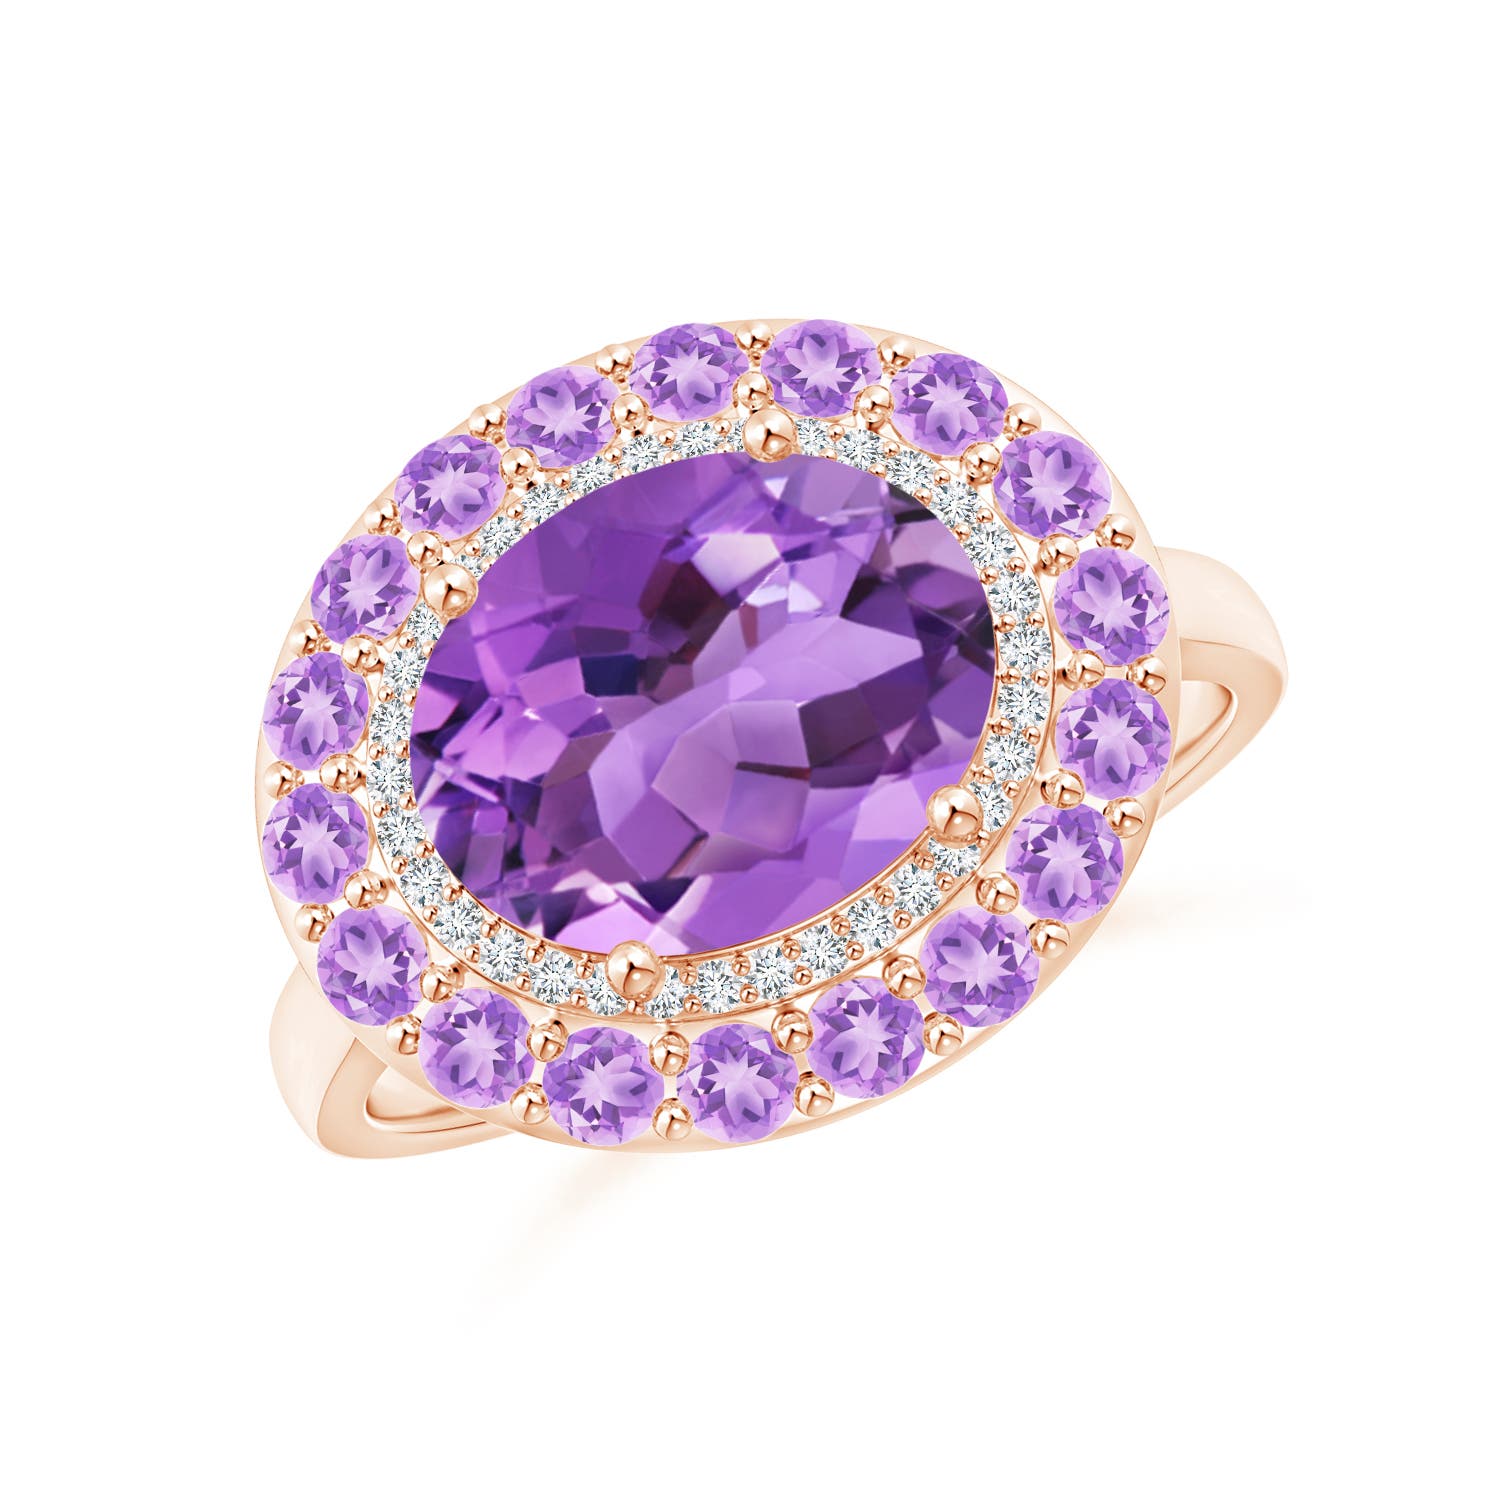 AA - Amethyst / 2.93 CT / 14 KT Rose Gold